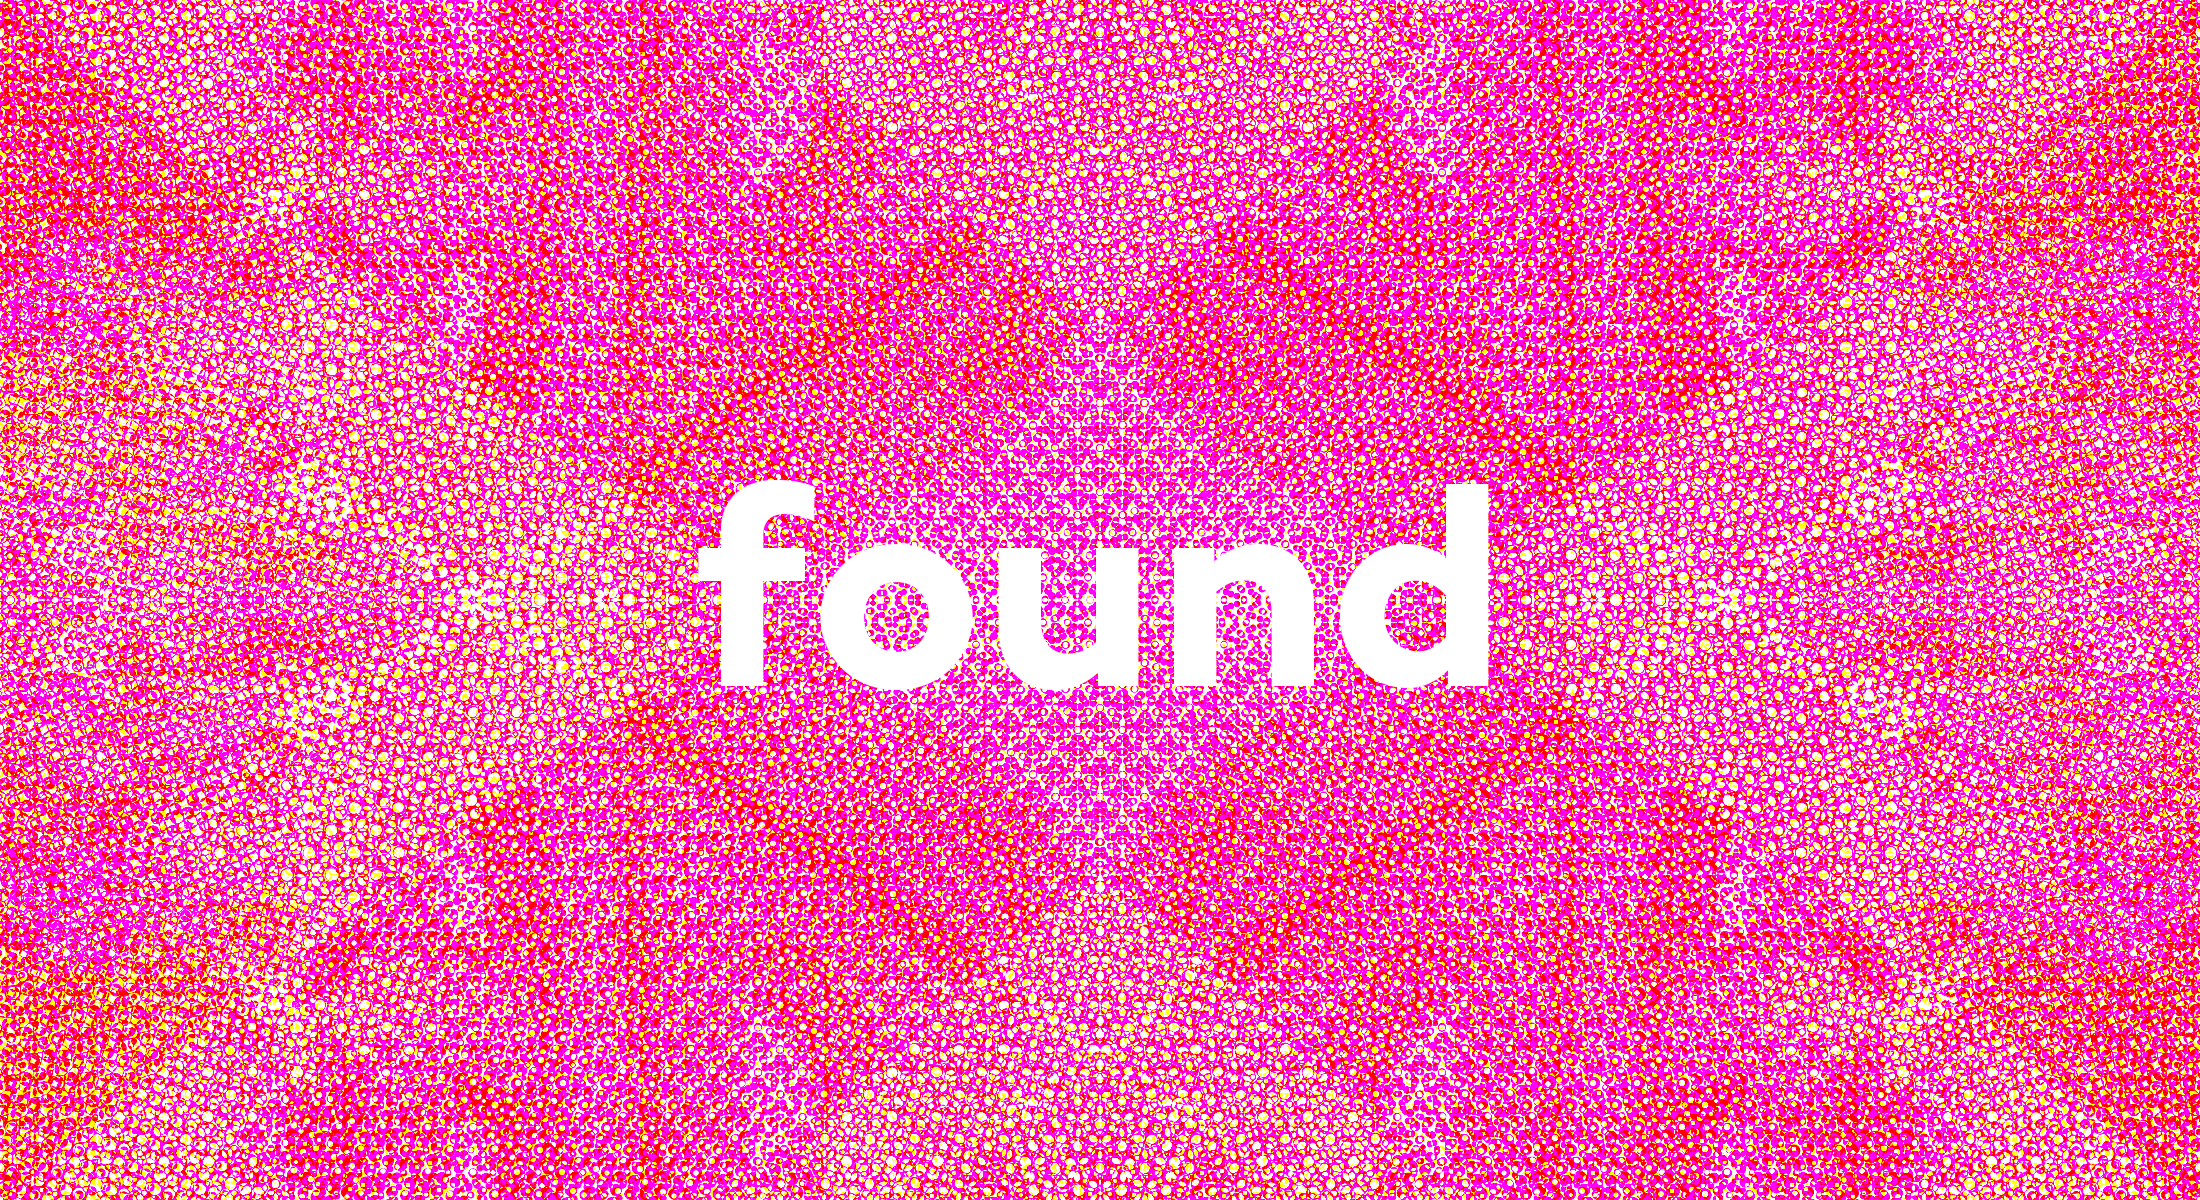 A bright pink, textured rectangle graphic with the word found overlaid in white text.